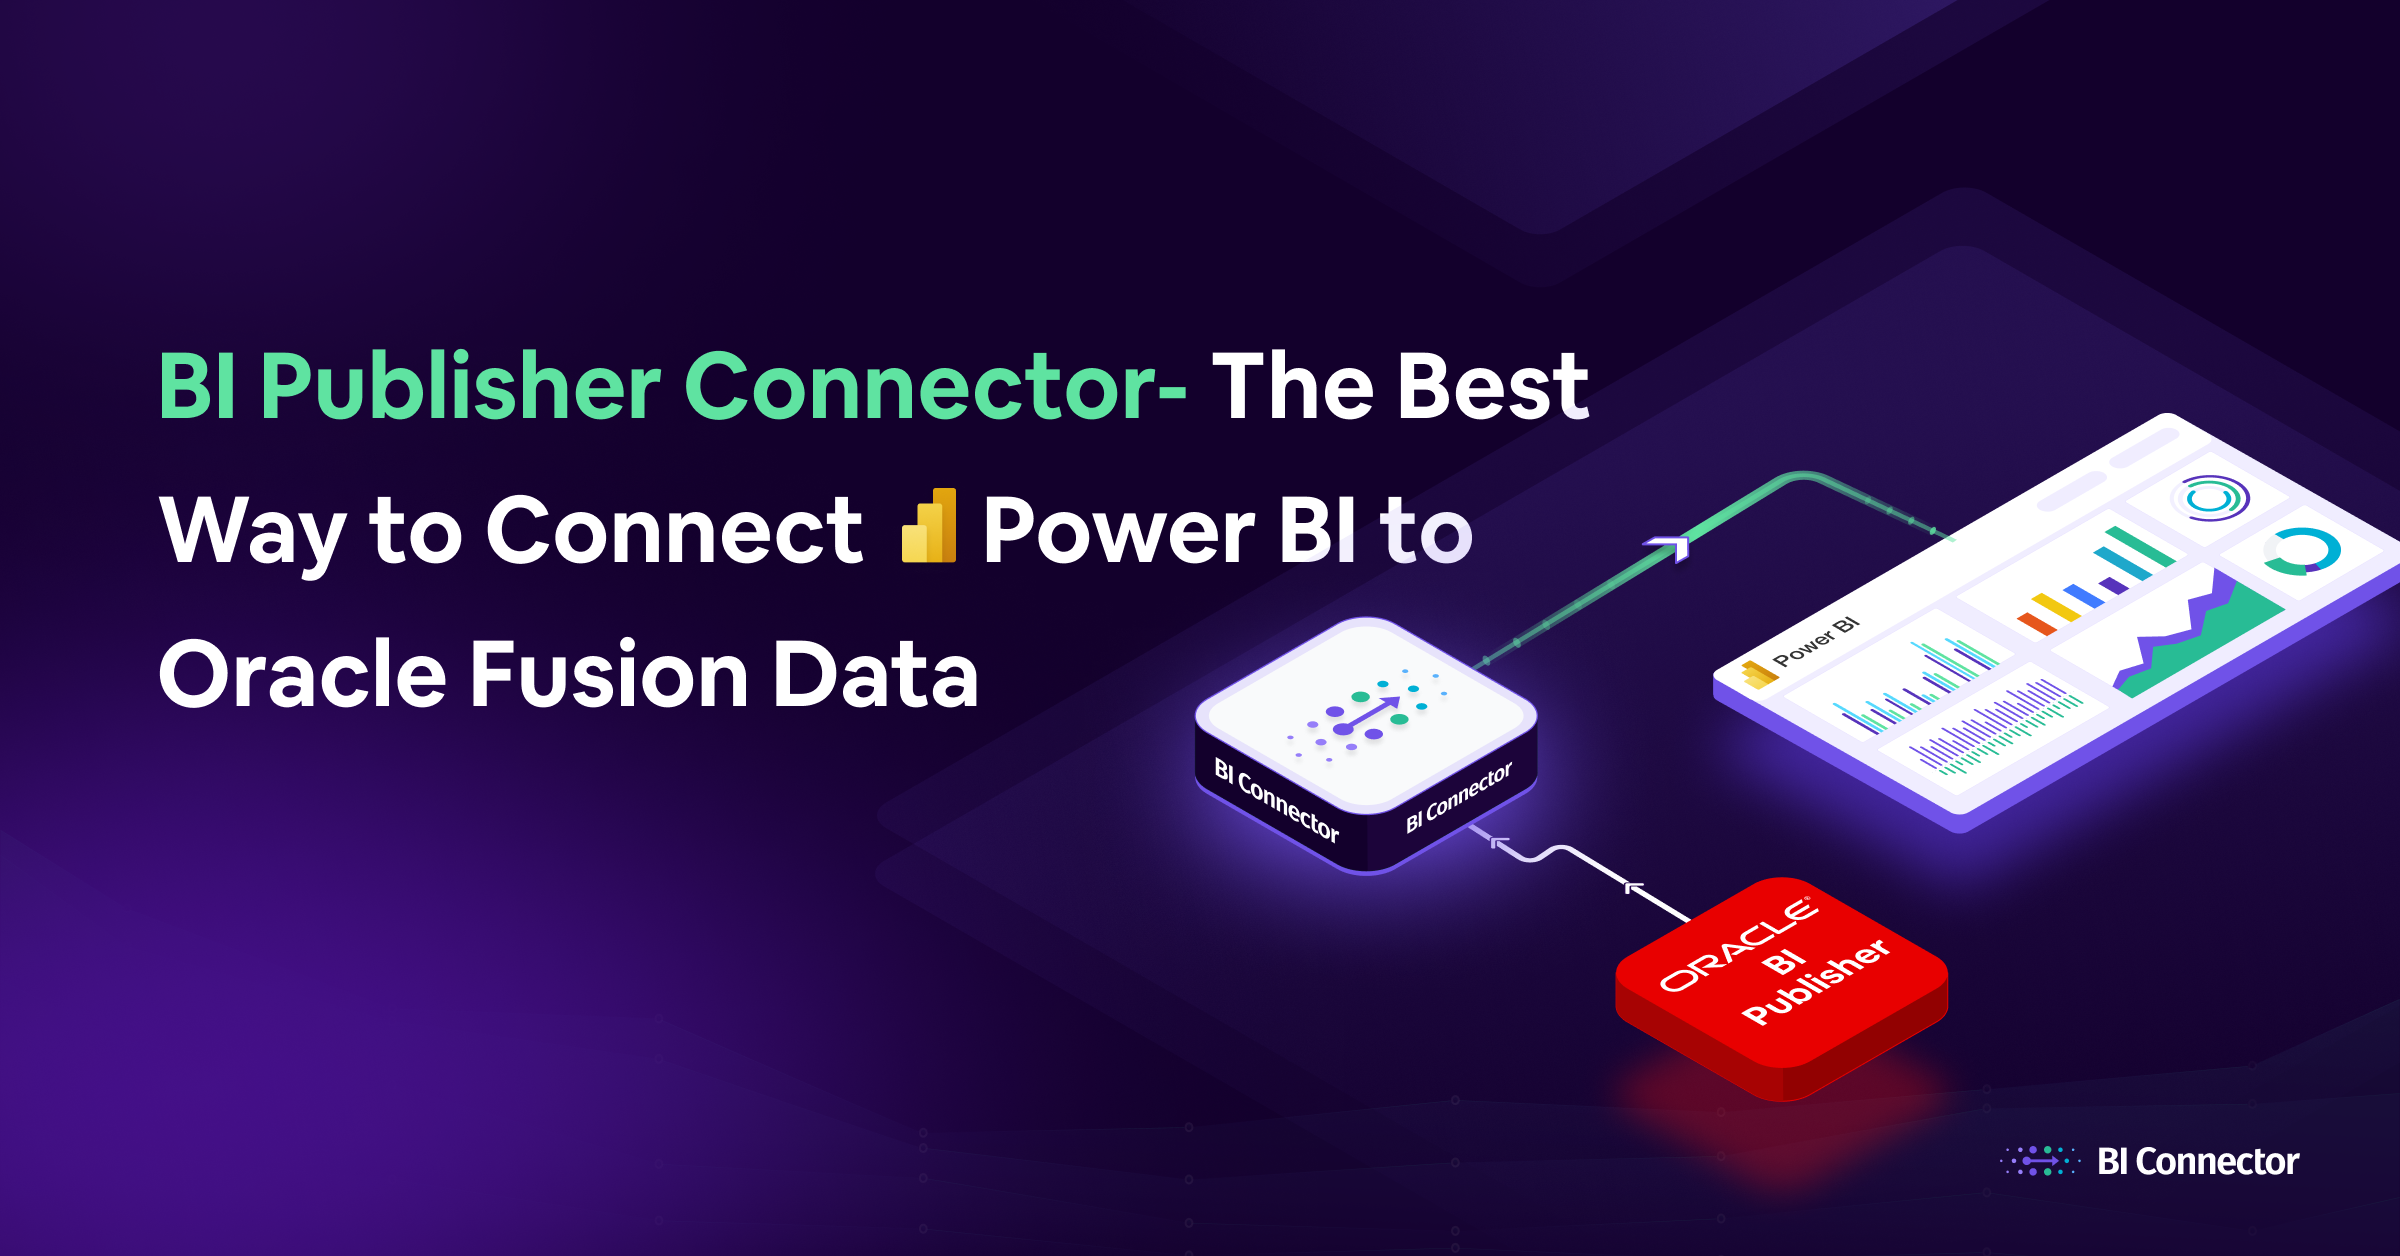 BI Publisher Connector; The Best way to connect Power BI to Oracle Fusion data